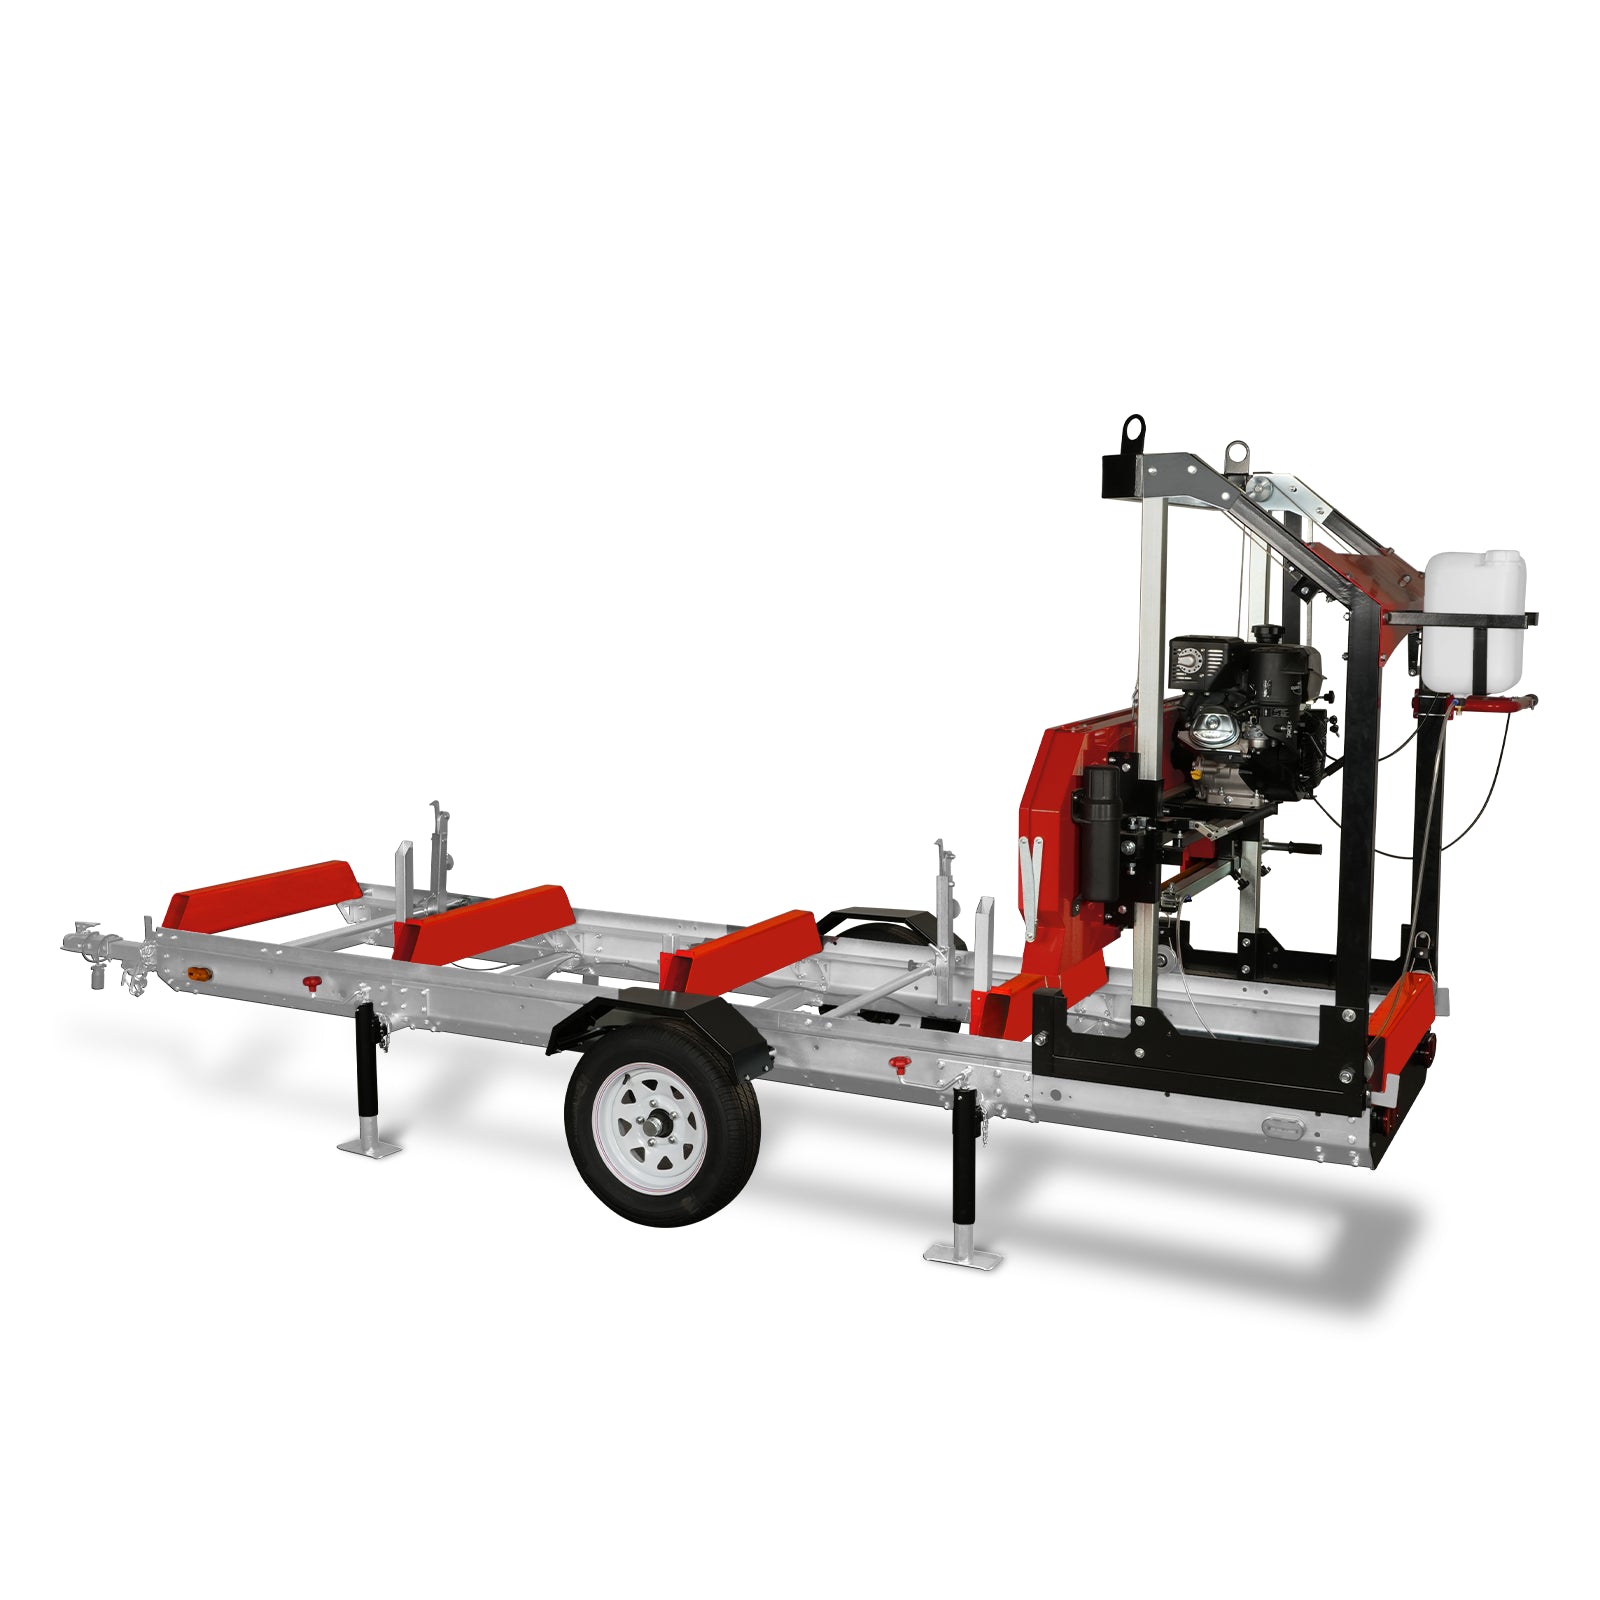 Primary Sub-Frame for Sawmill Trailer , 13' Track Length ( Compatible for SM-32 )